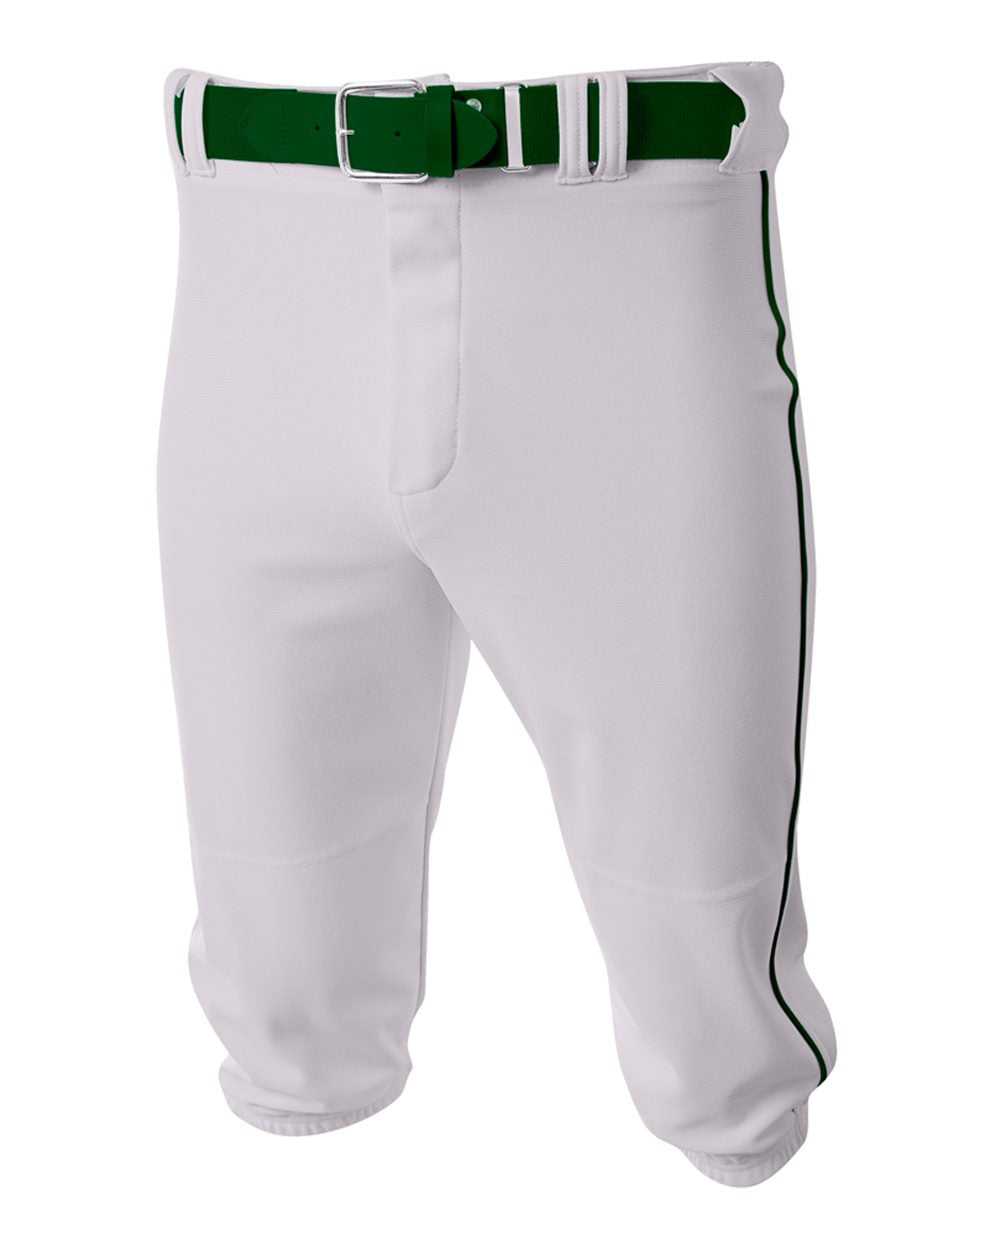 A4 NB6003 Baseball Knicker Pant - White Forest